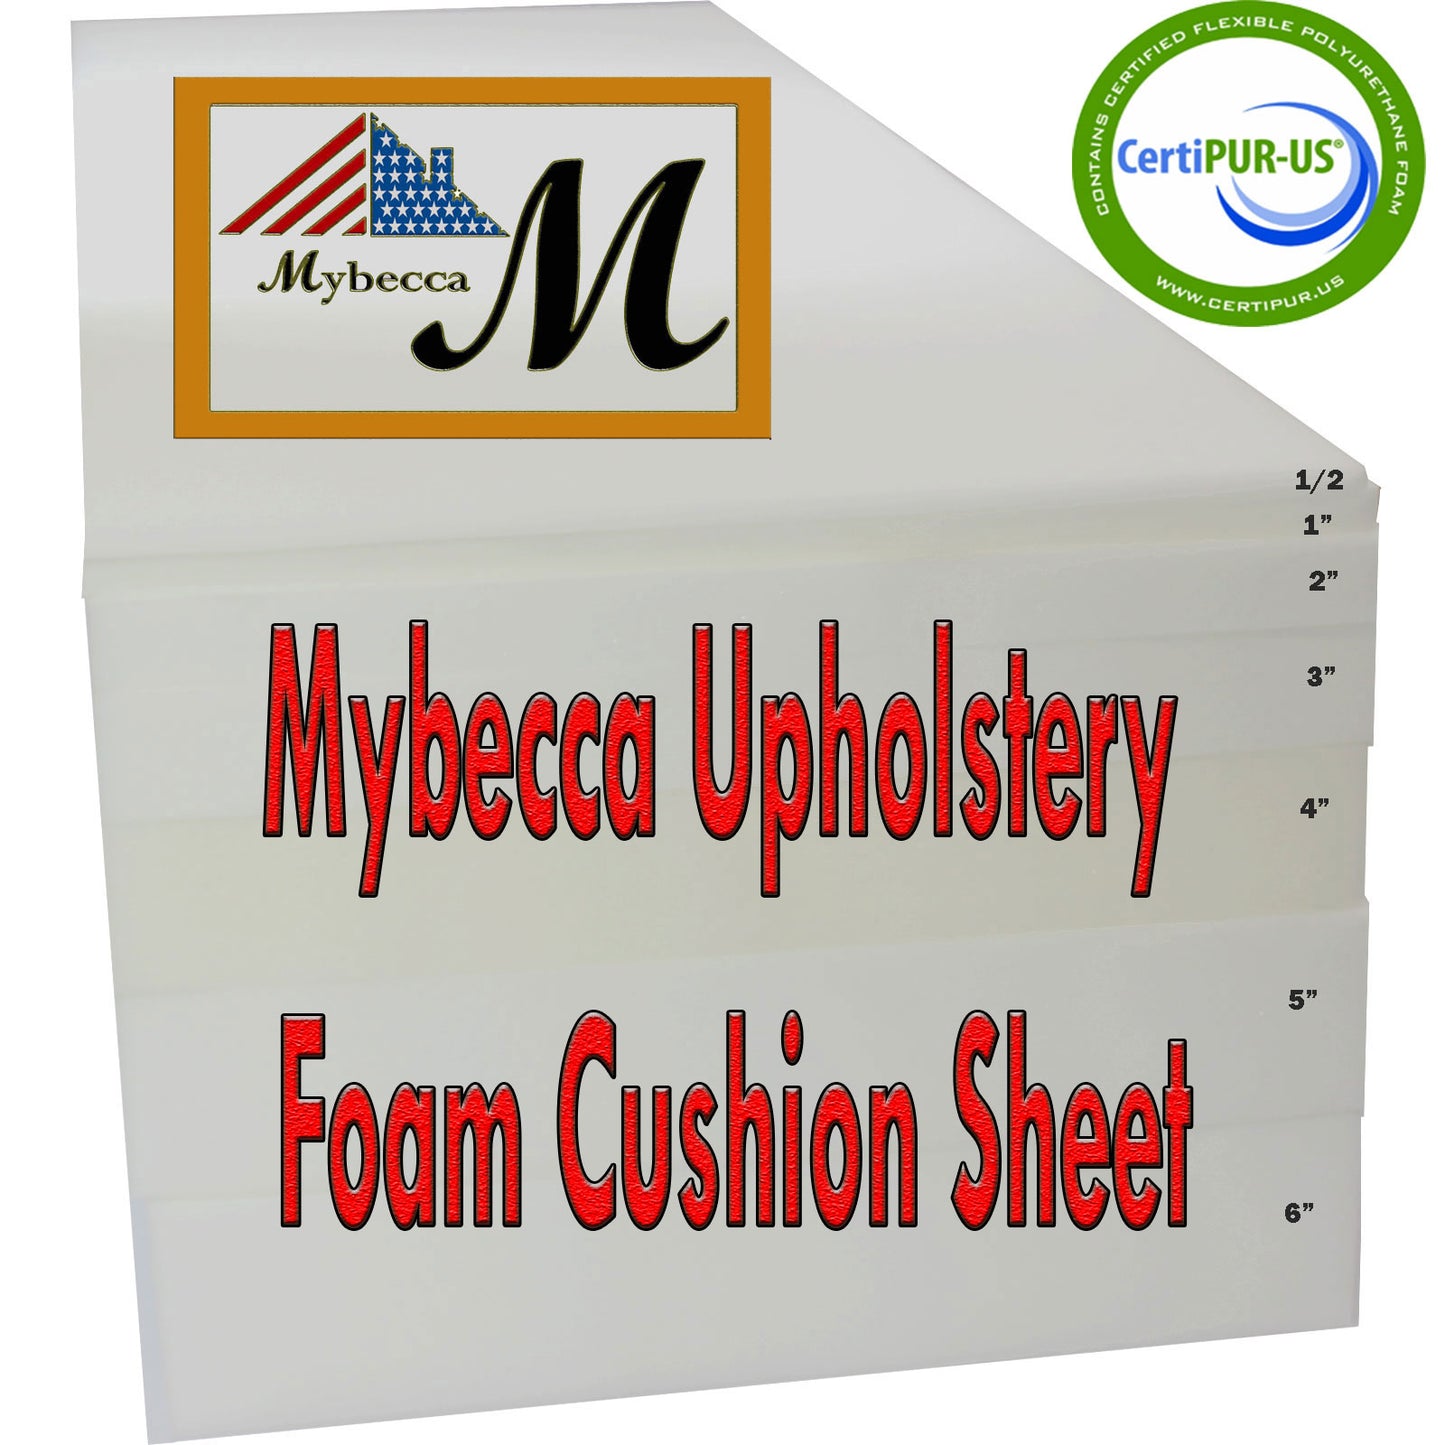 Mybecca 4H x 24W x 72L High Density Firm Upholstery Foam Sheet for Seat Replacement, Cross-Sectional Cushion Pad, Foam Padding, Boat Seat, Benches & Auto Car Seats